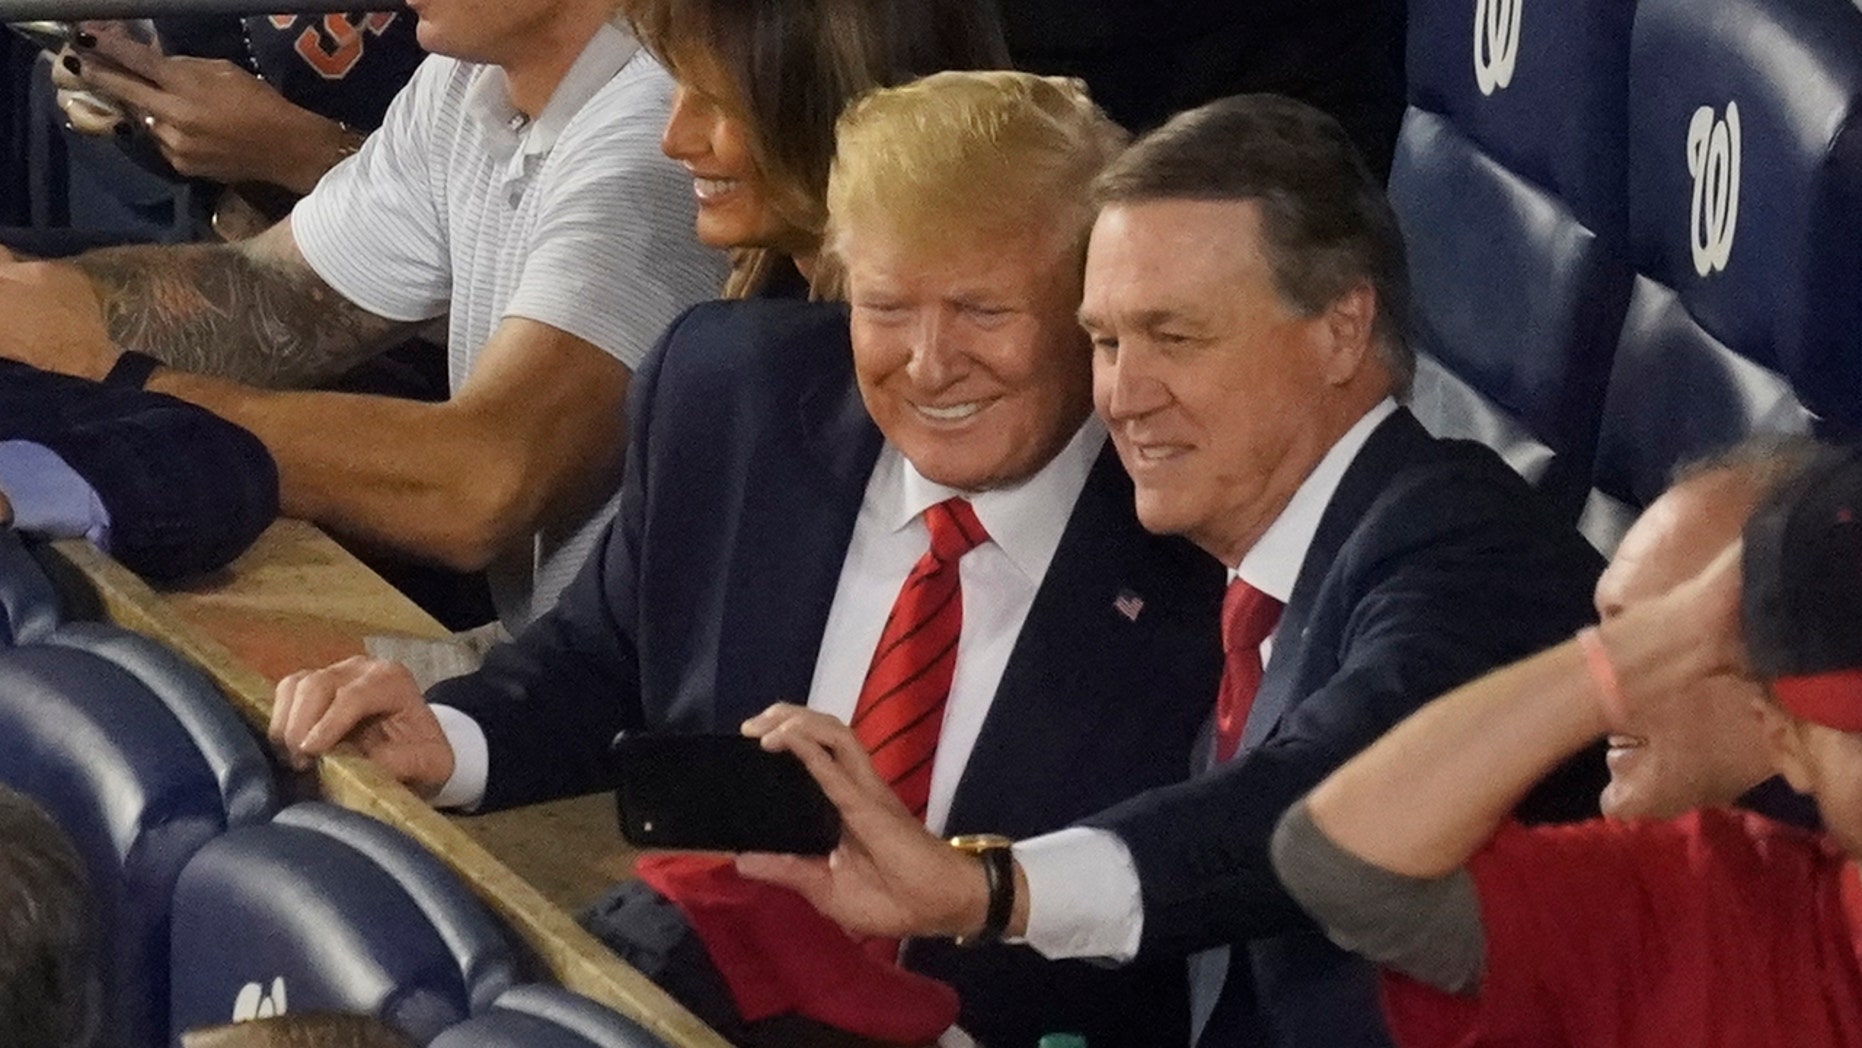 Sen. David Perdue, R-Ga., takes a selfie with President Donald Trump during the seventh inning of Game 5 of the baseball World Series between the Houston Astros and the Washington Nationals Sunday, Oct. 27, 2019, in Washington. (AP Photo/Pablo Martinez Monsivais)